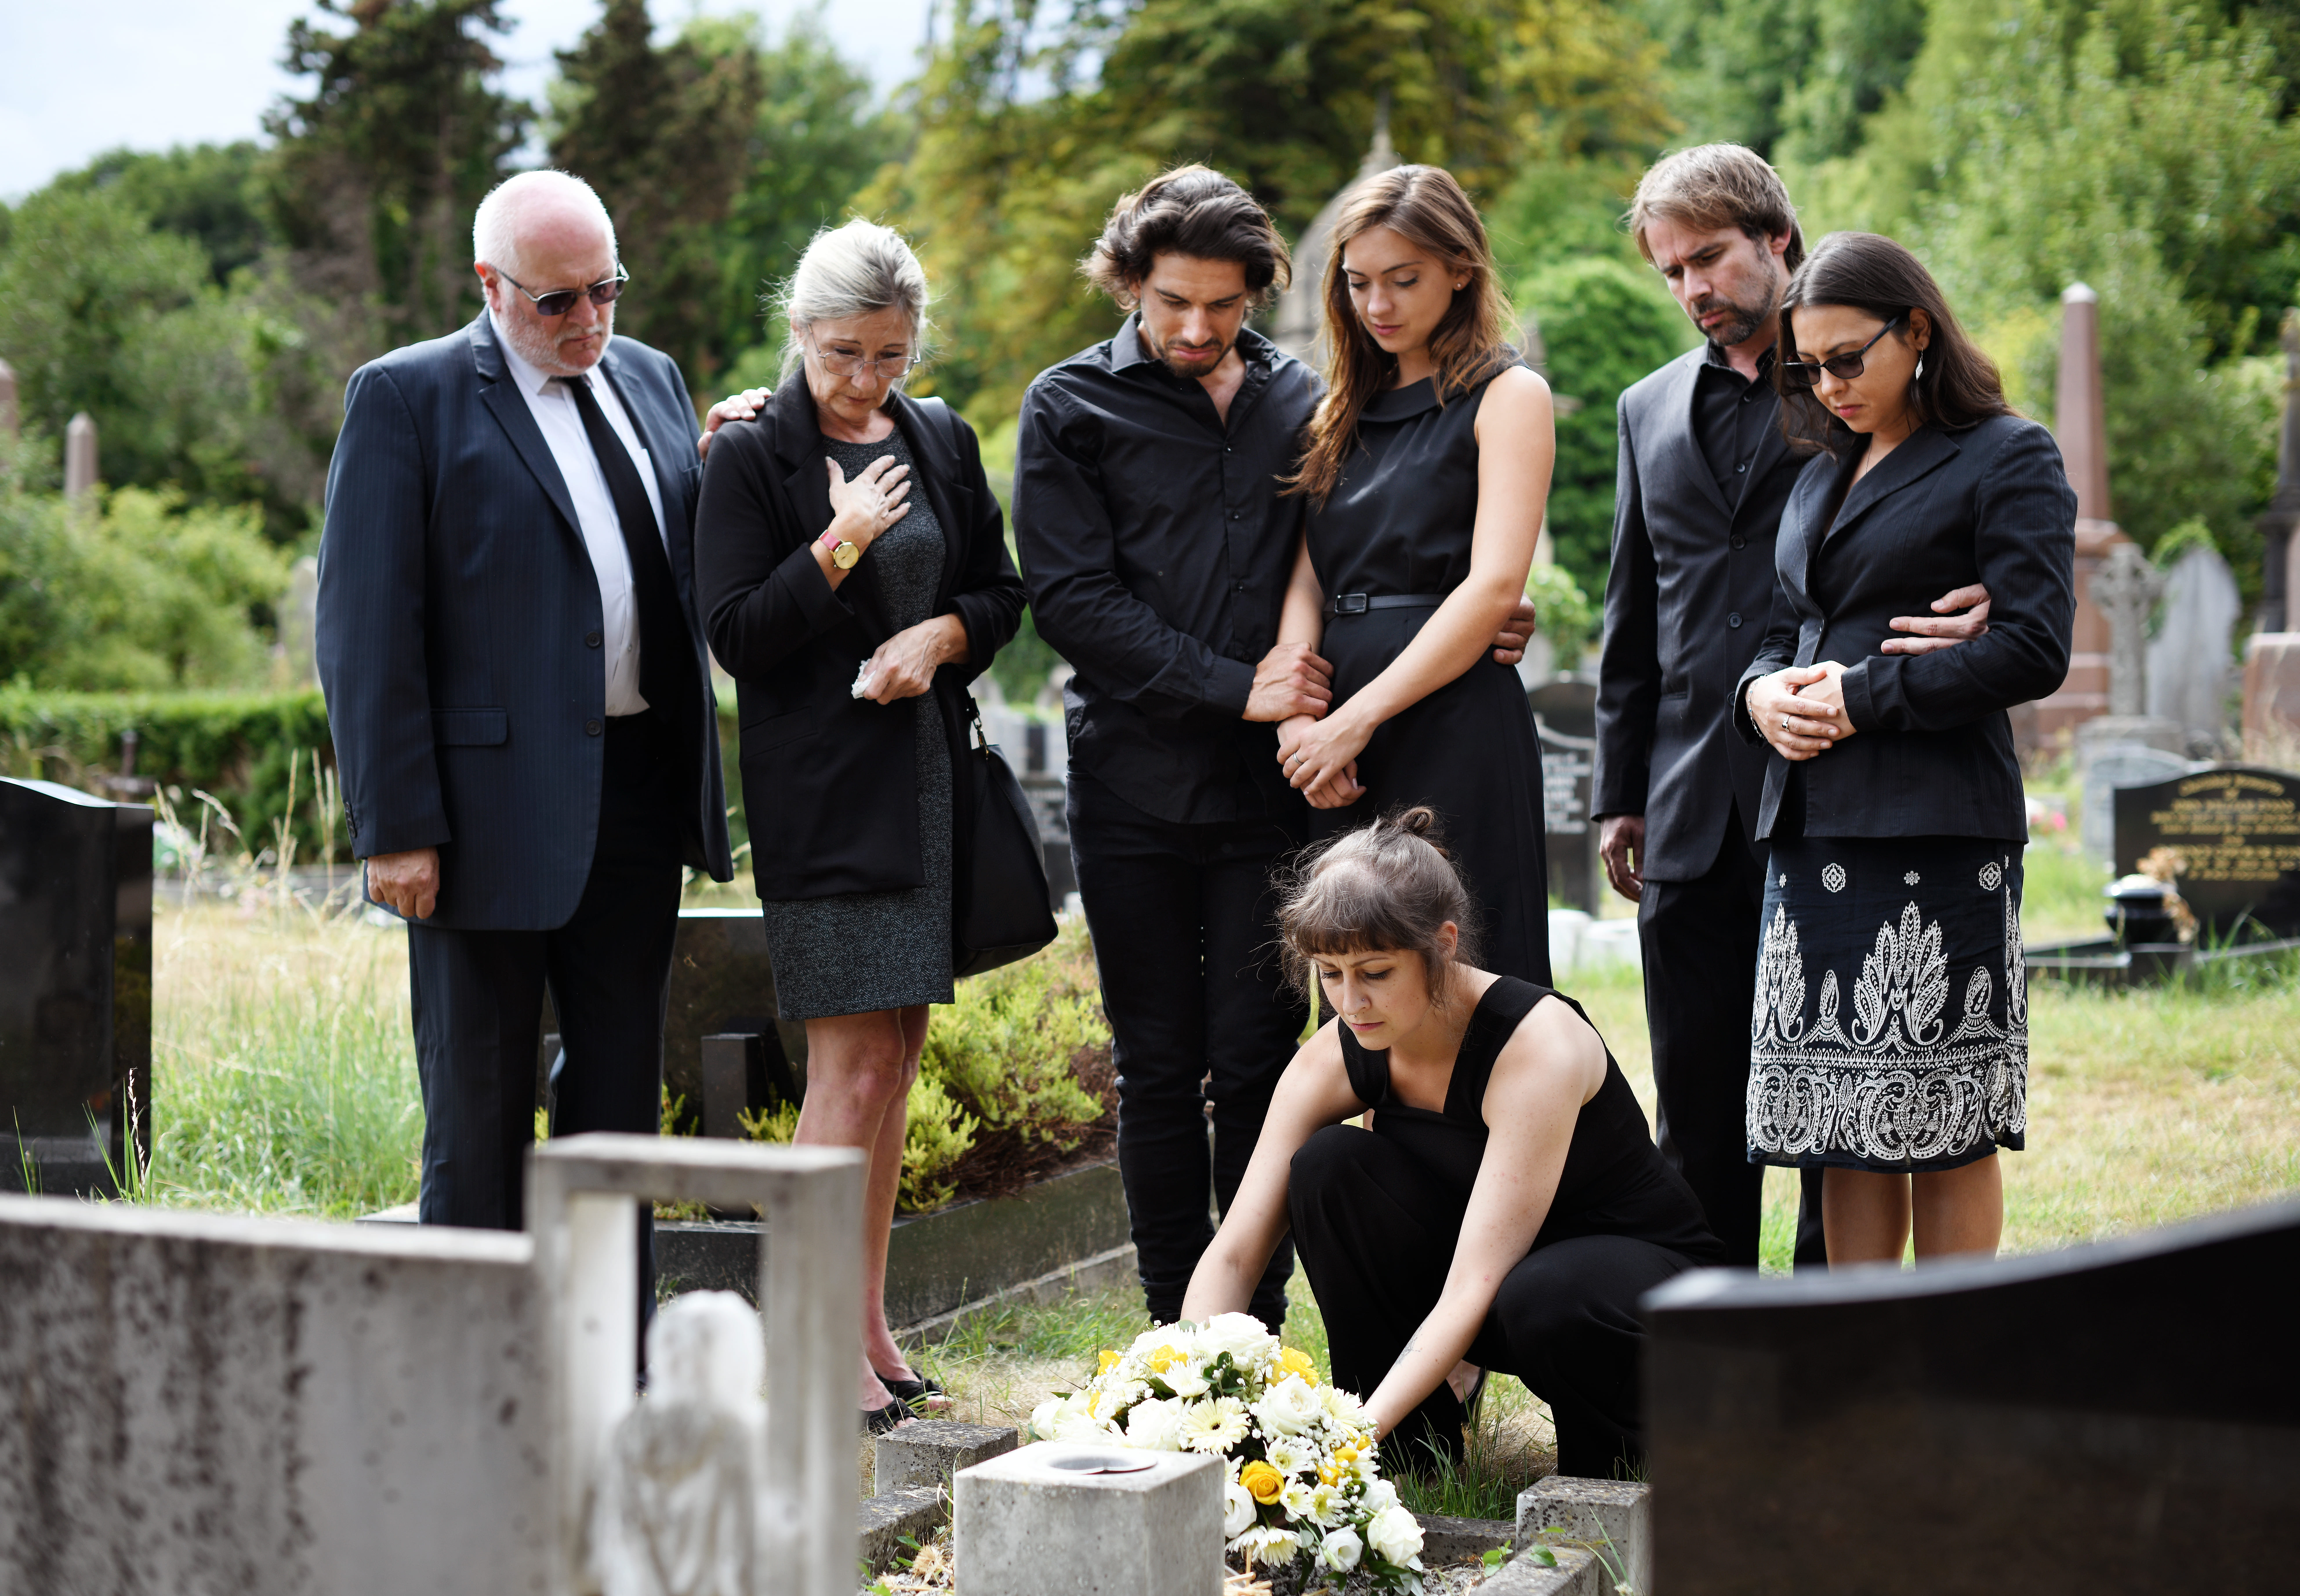 Family laying flowers on the grave in a cemetery | Source: Shutterstock